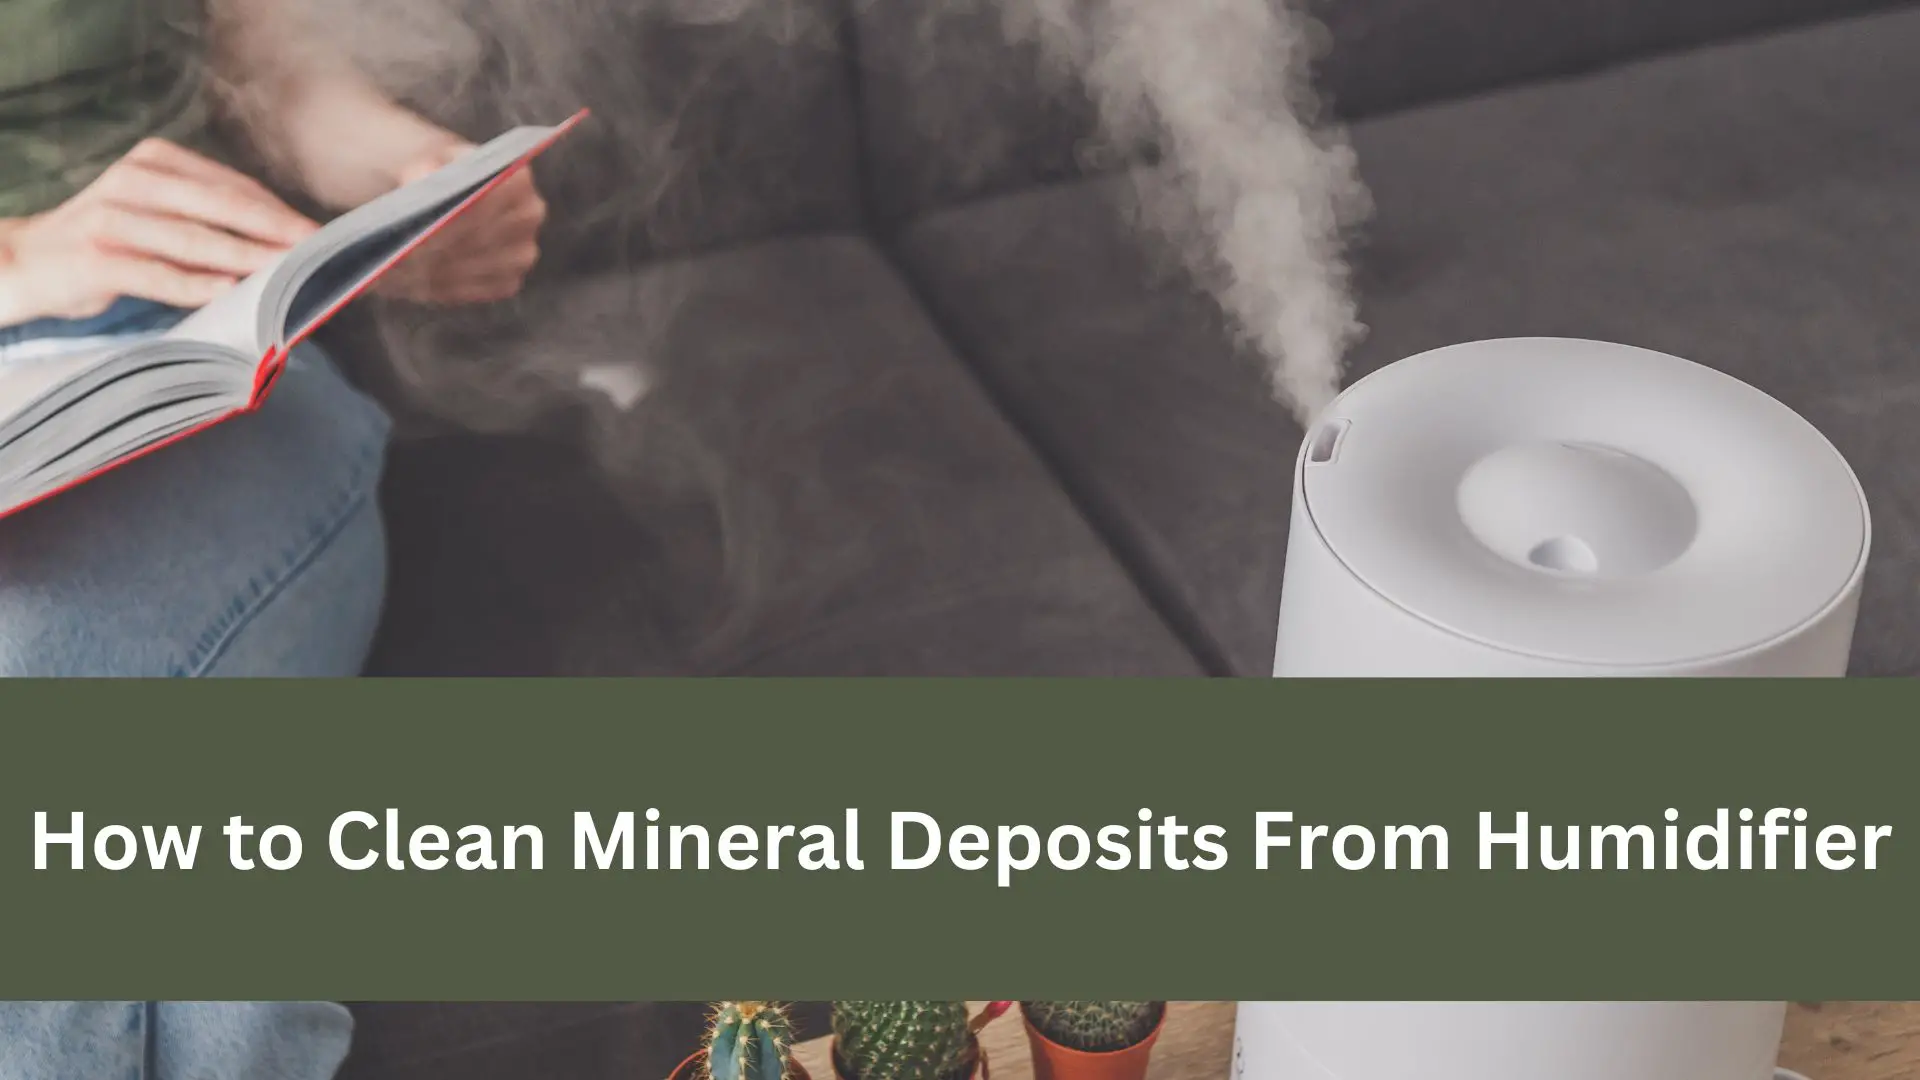 How to Clean Mineral Deposits From Humidifier